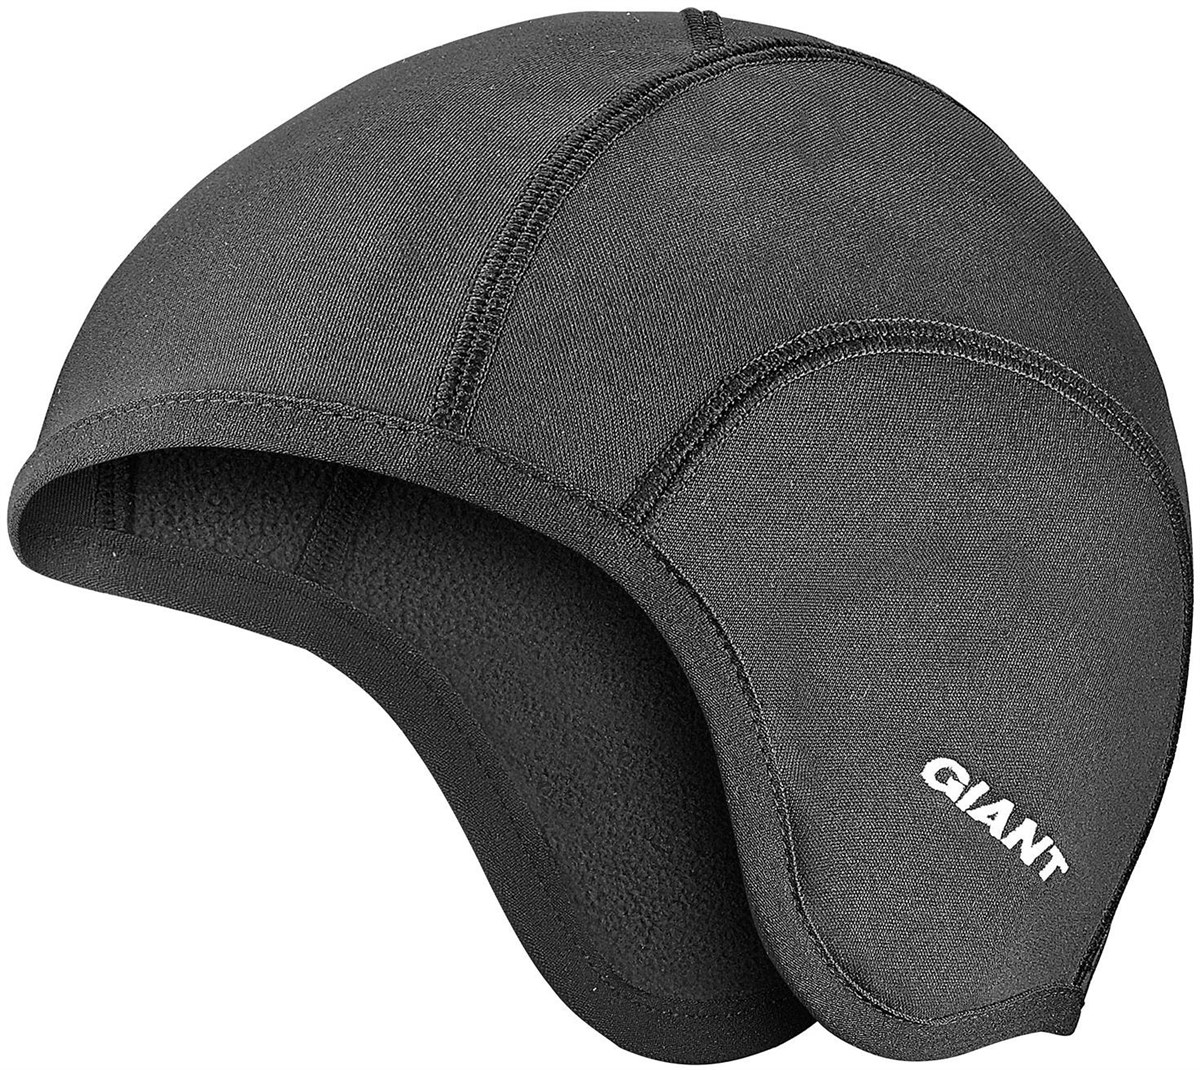 Giant Proshield Cycling Skull Cap product image